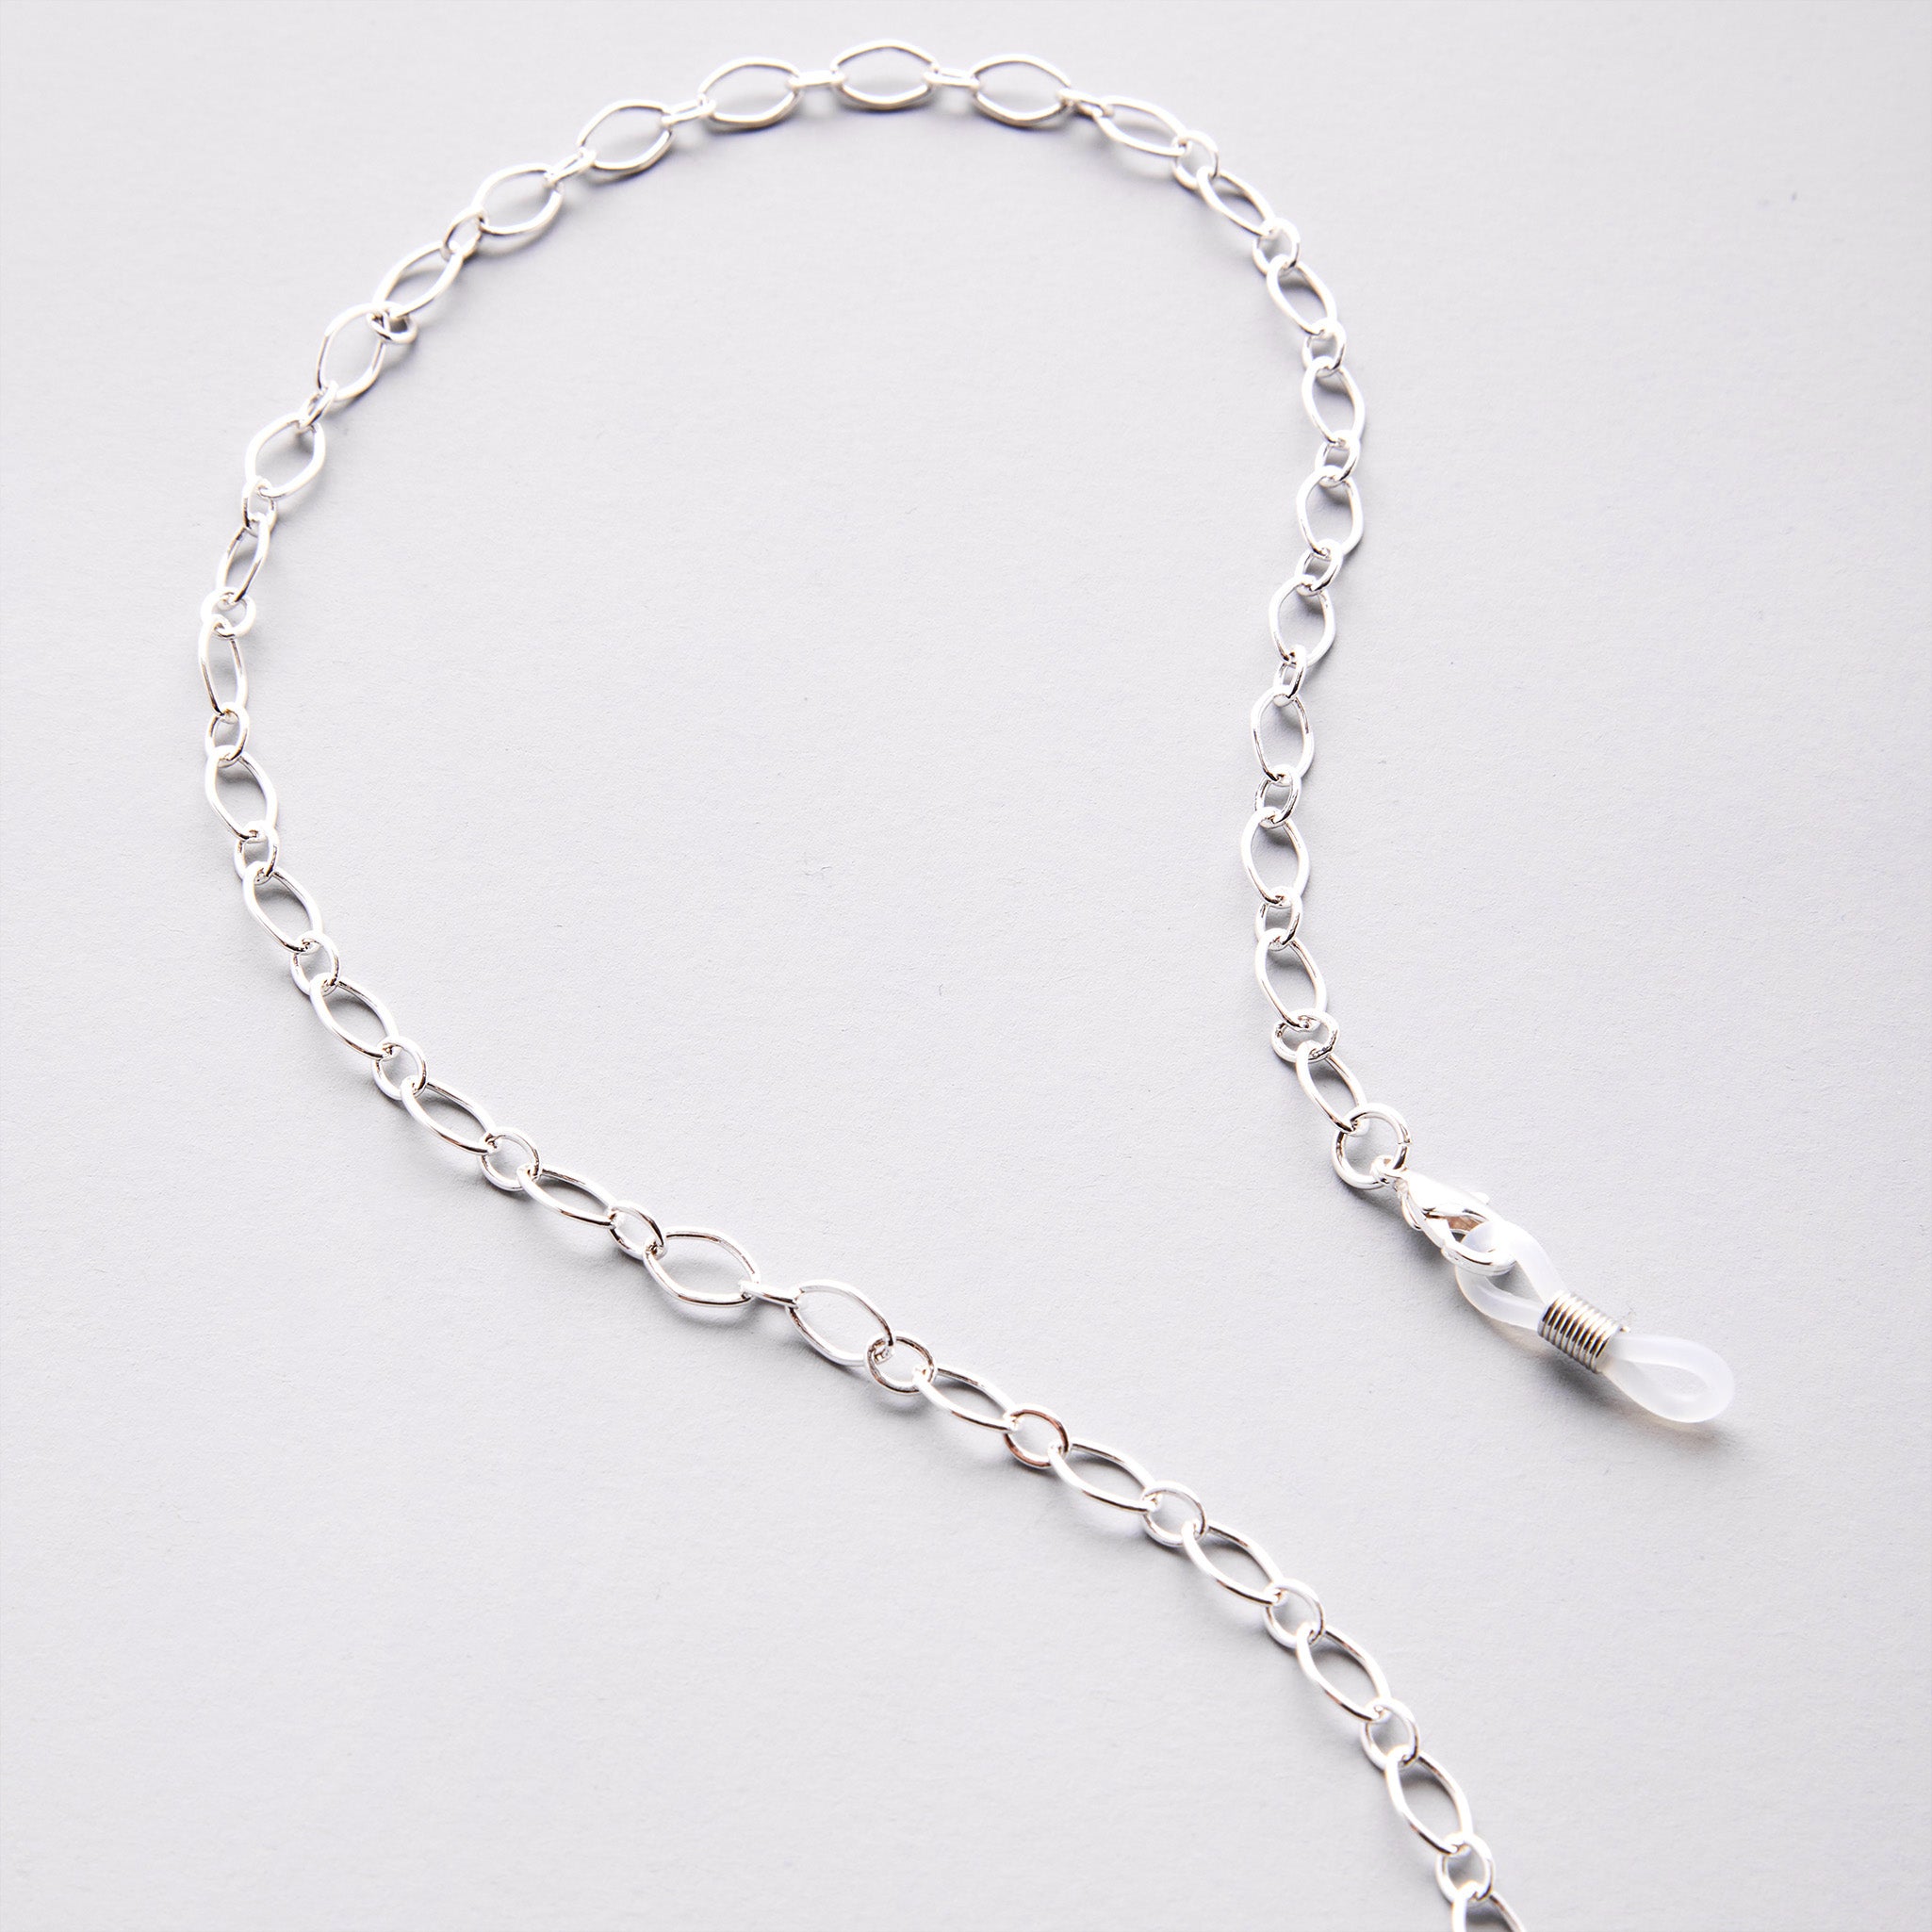 Organic Link Chain in Silver